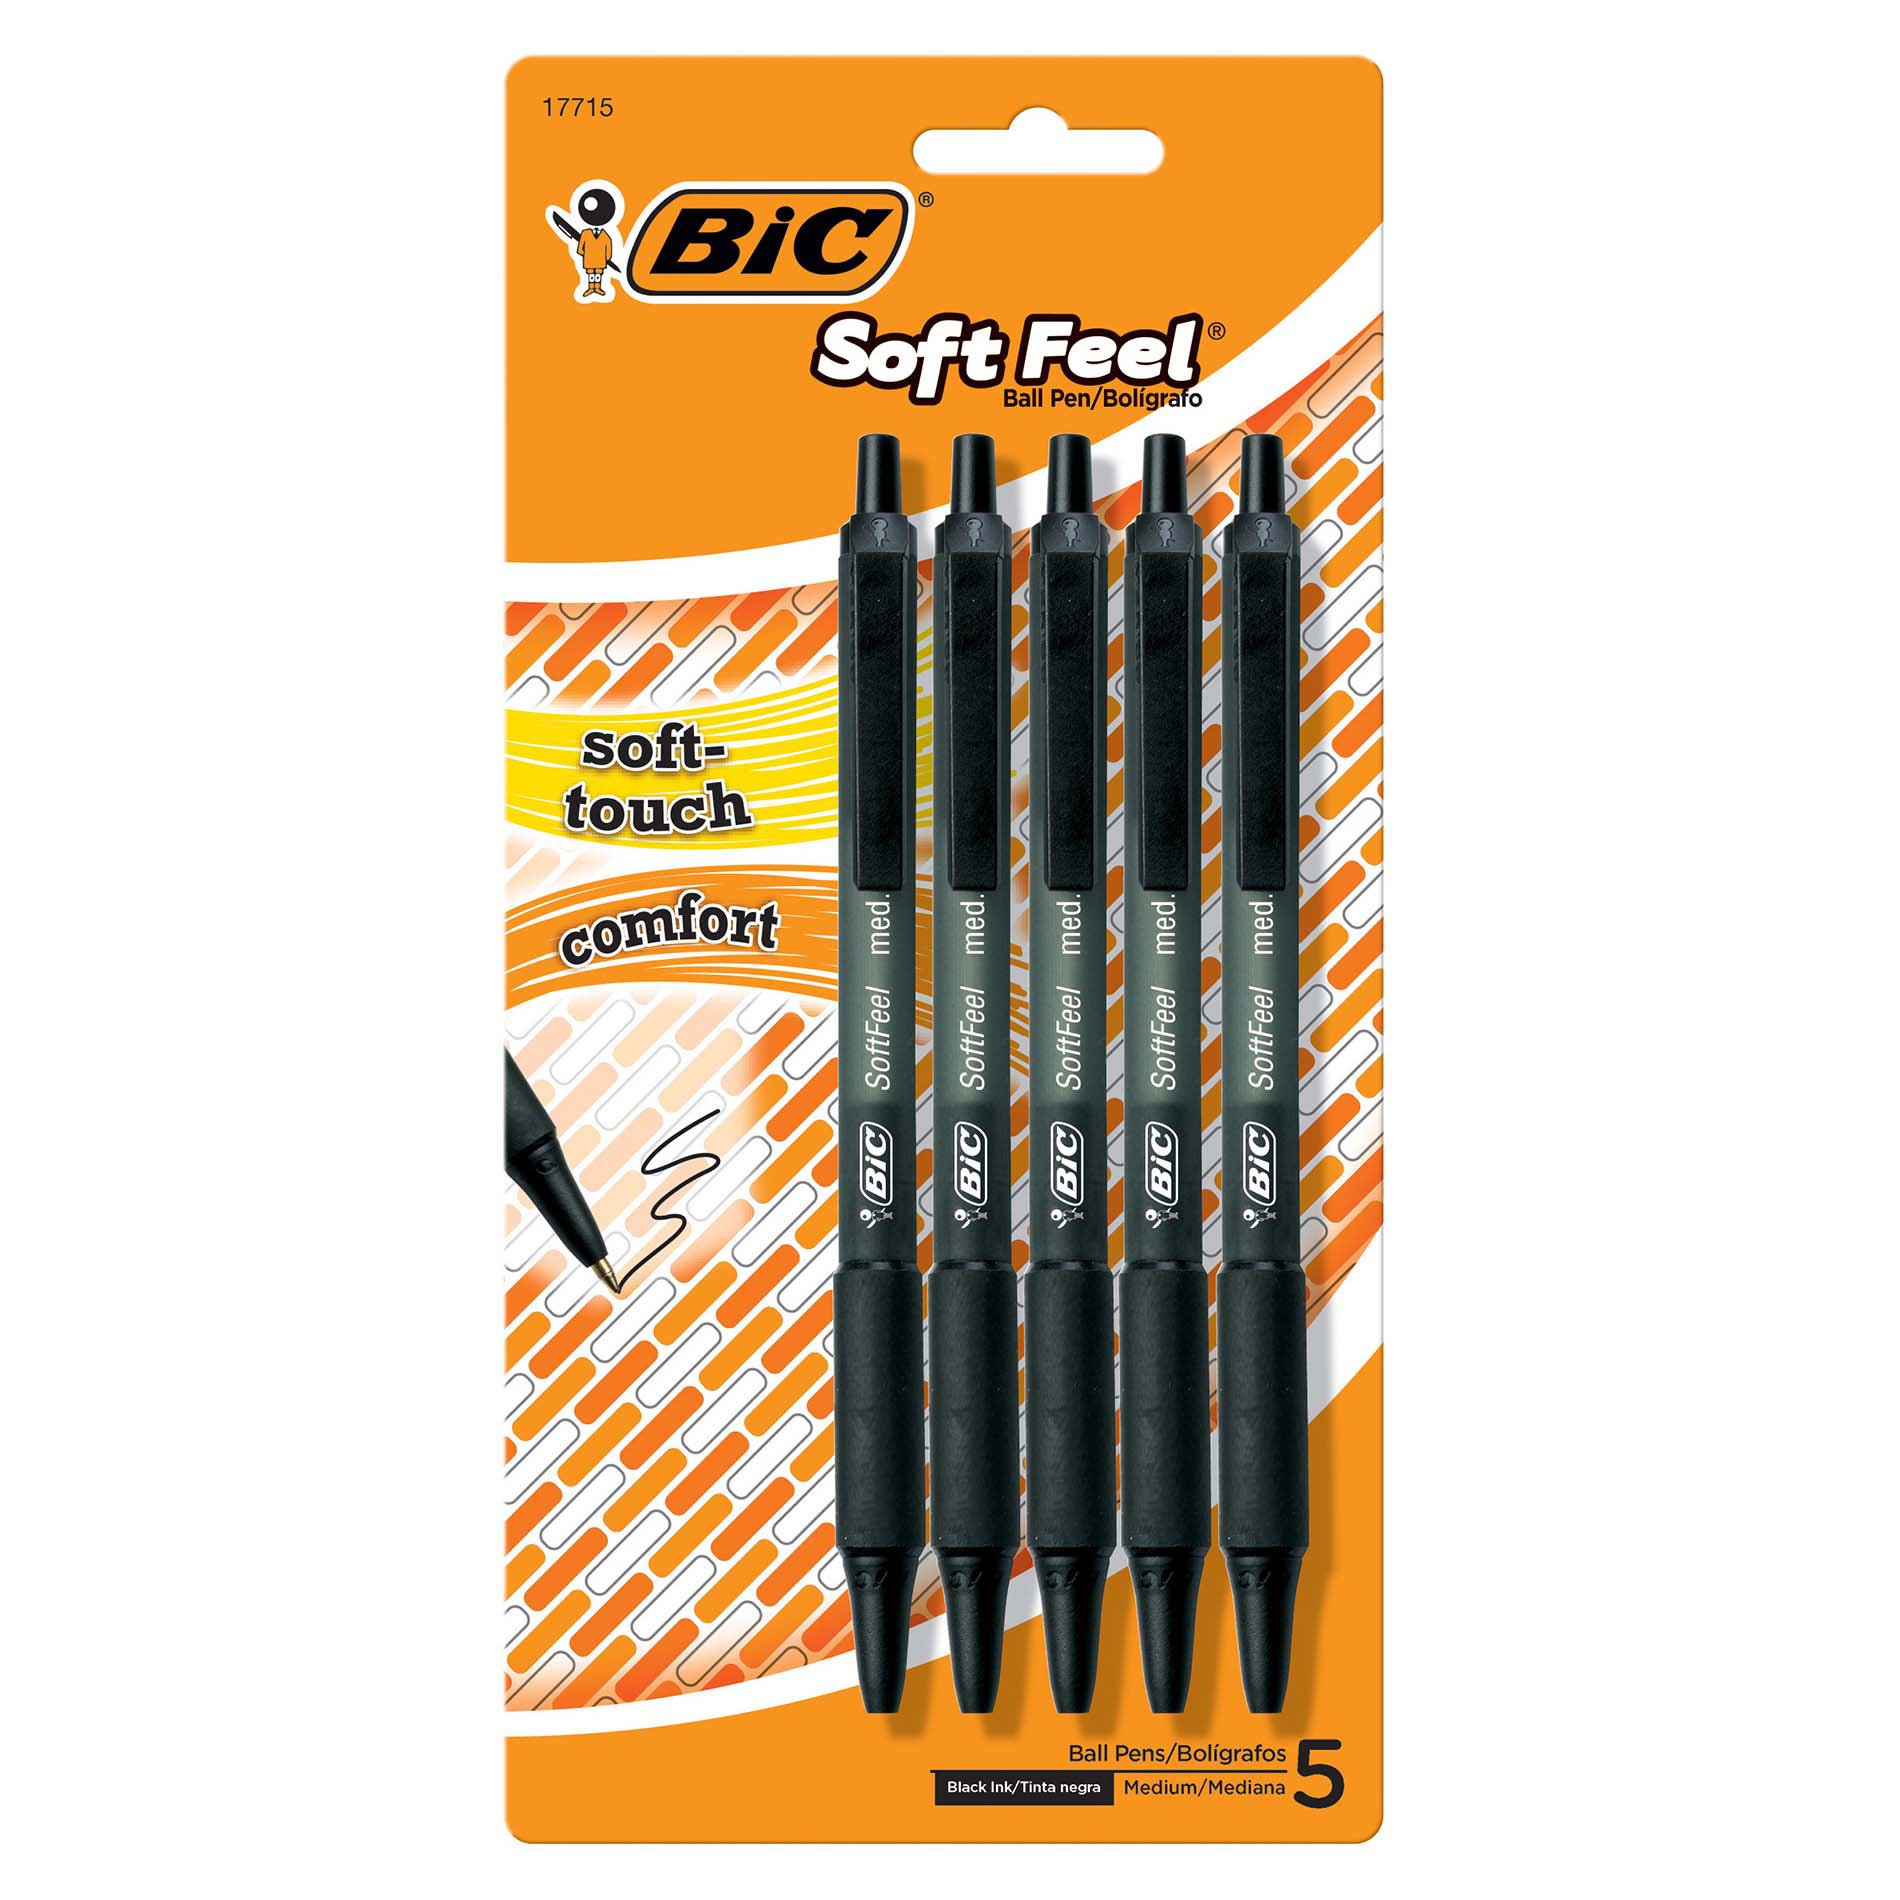 Ballpoint Pens With Sayings Writing Pens 5pcs Retractable Fine Point Pens  Soft Touch Encouraging Pen Smooth